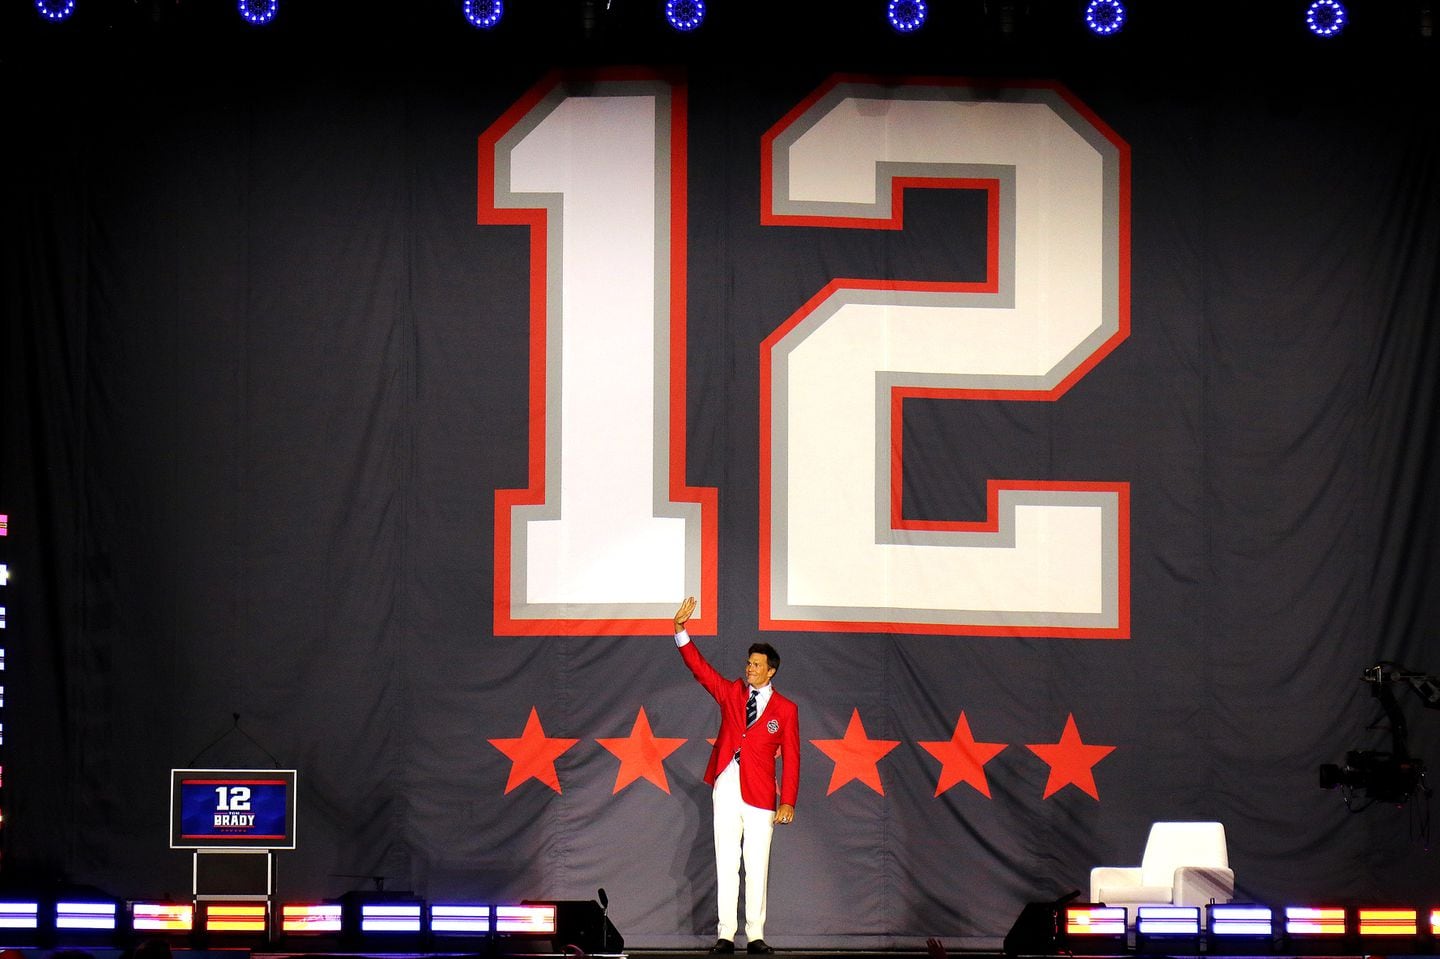 Tom Brady waves under his retired number 12 on stage as he wears his red jacket.